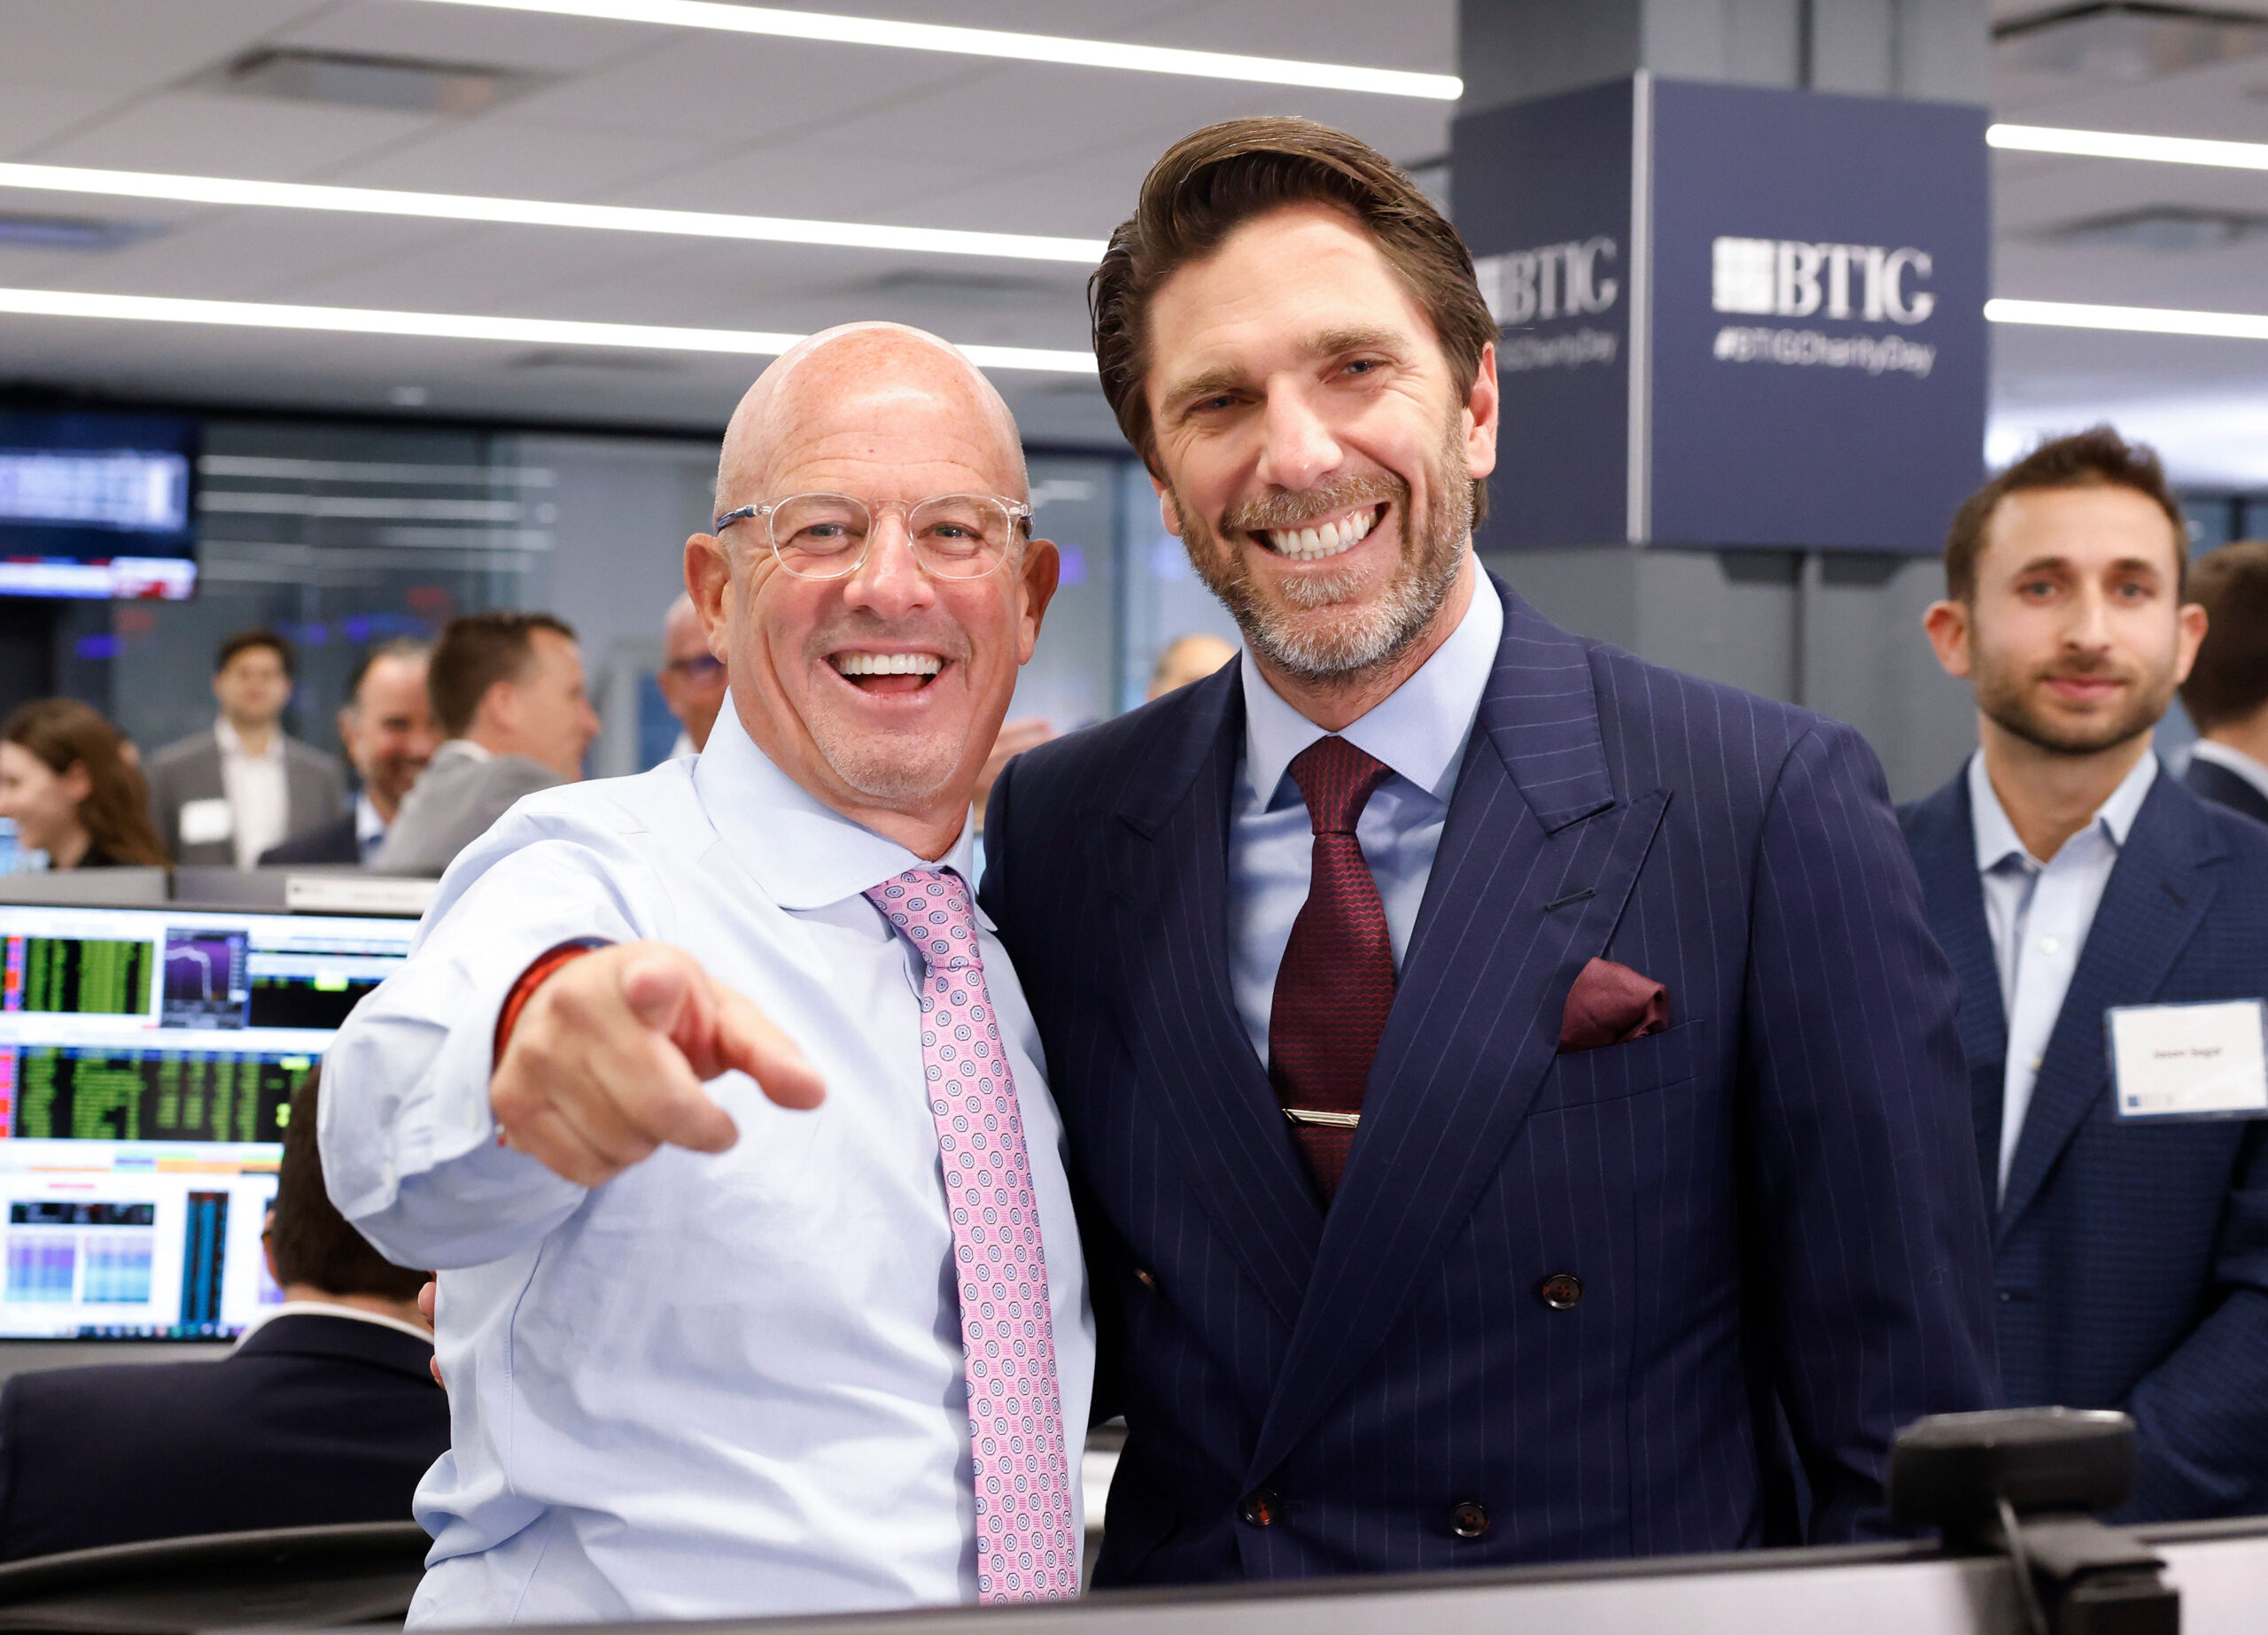 On Tuesday May 2nd 2023, HLF and its Founder Henrik Lundqvist, participated in BTIG Charity Day. It was a great morning on their trading floor connecting with old and new friends. It’s an honor to be part of this day raising funds for many important causes.